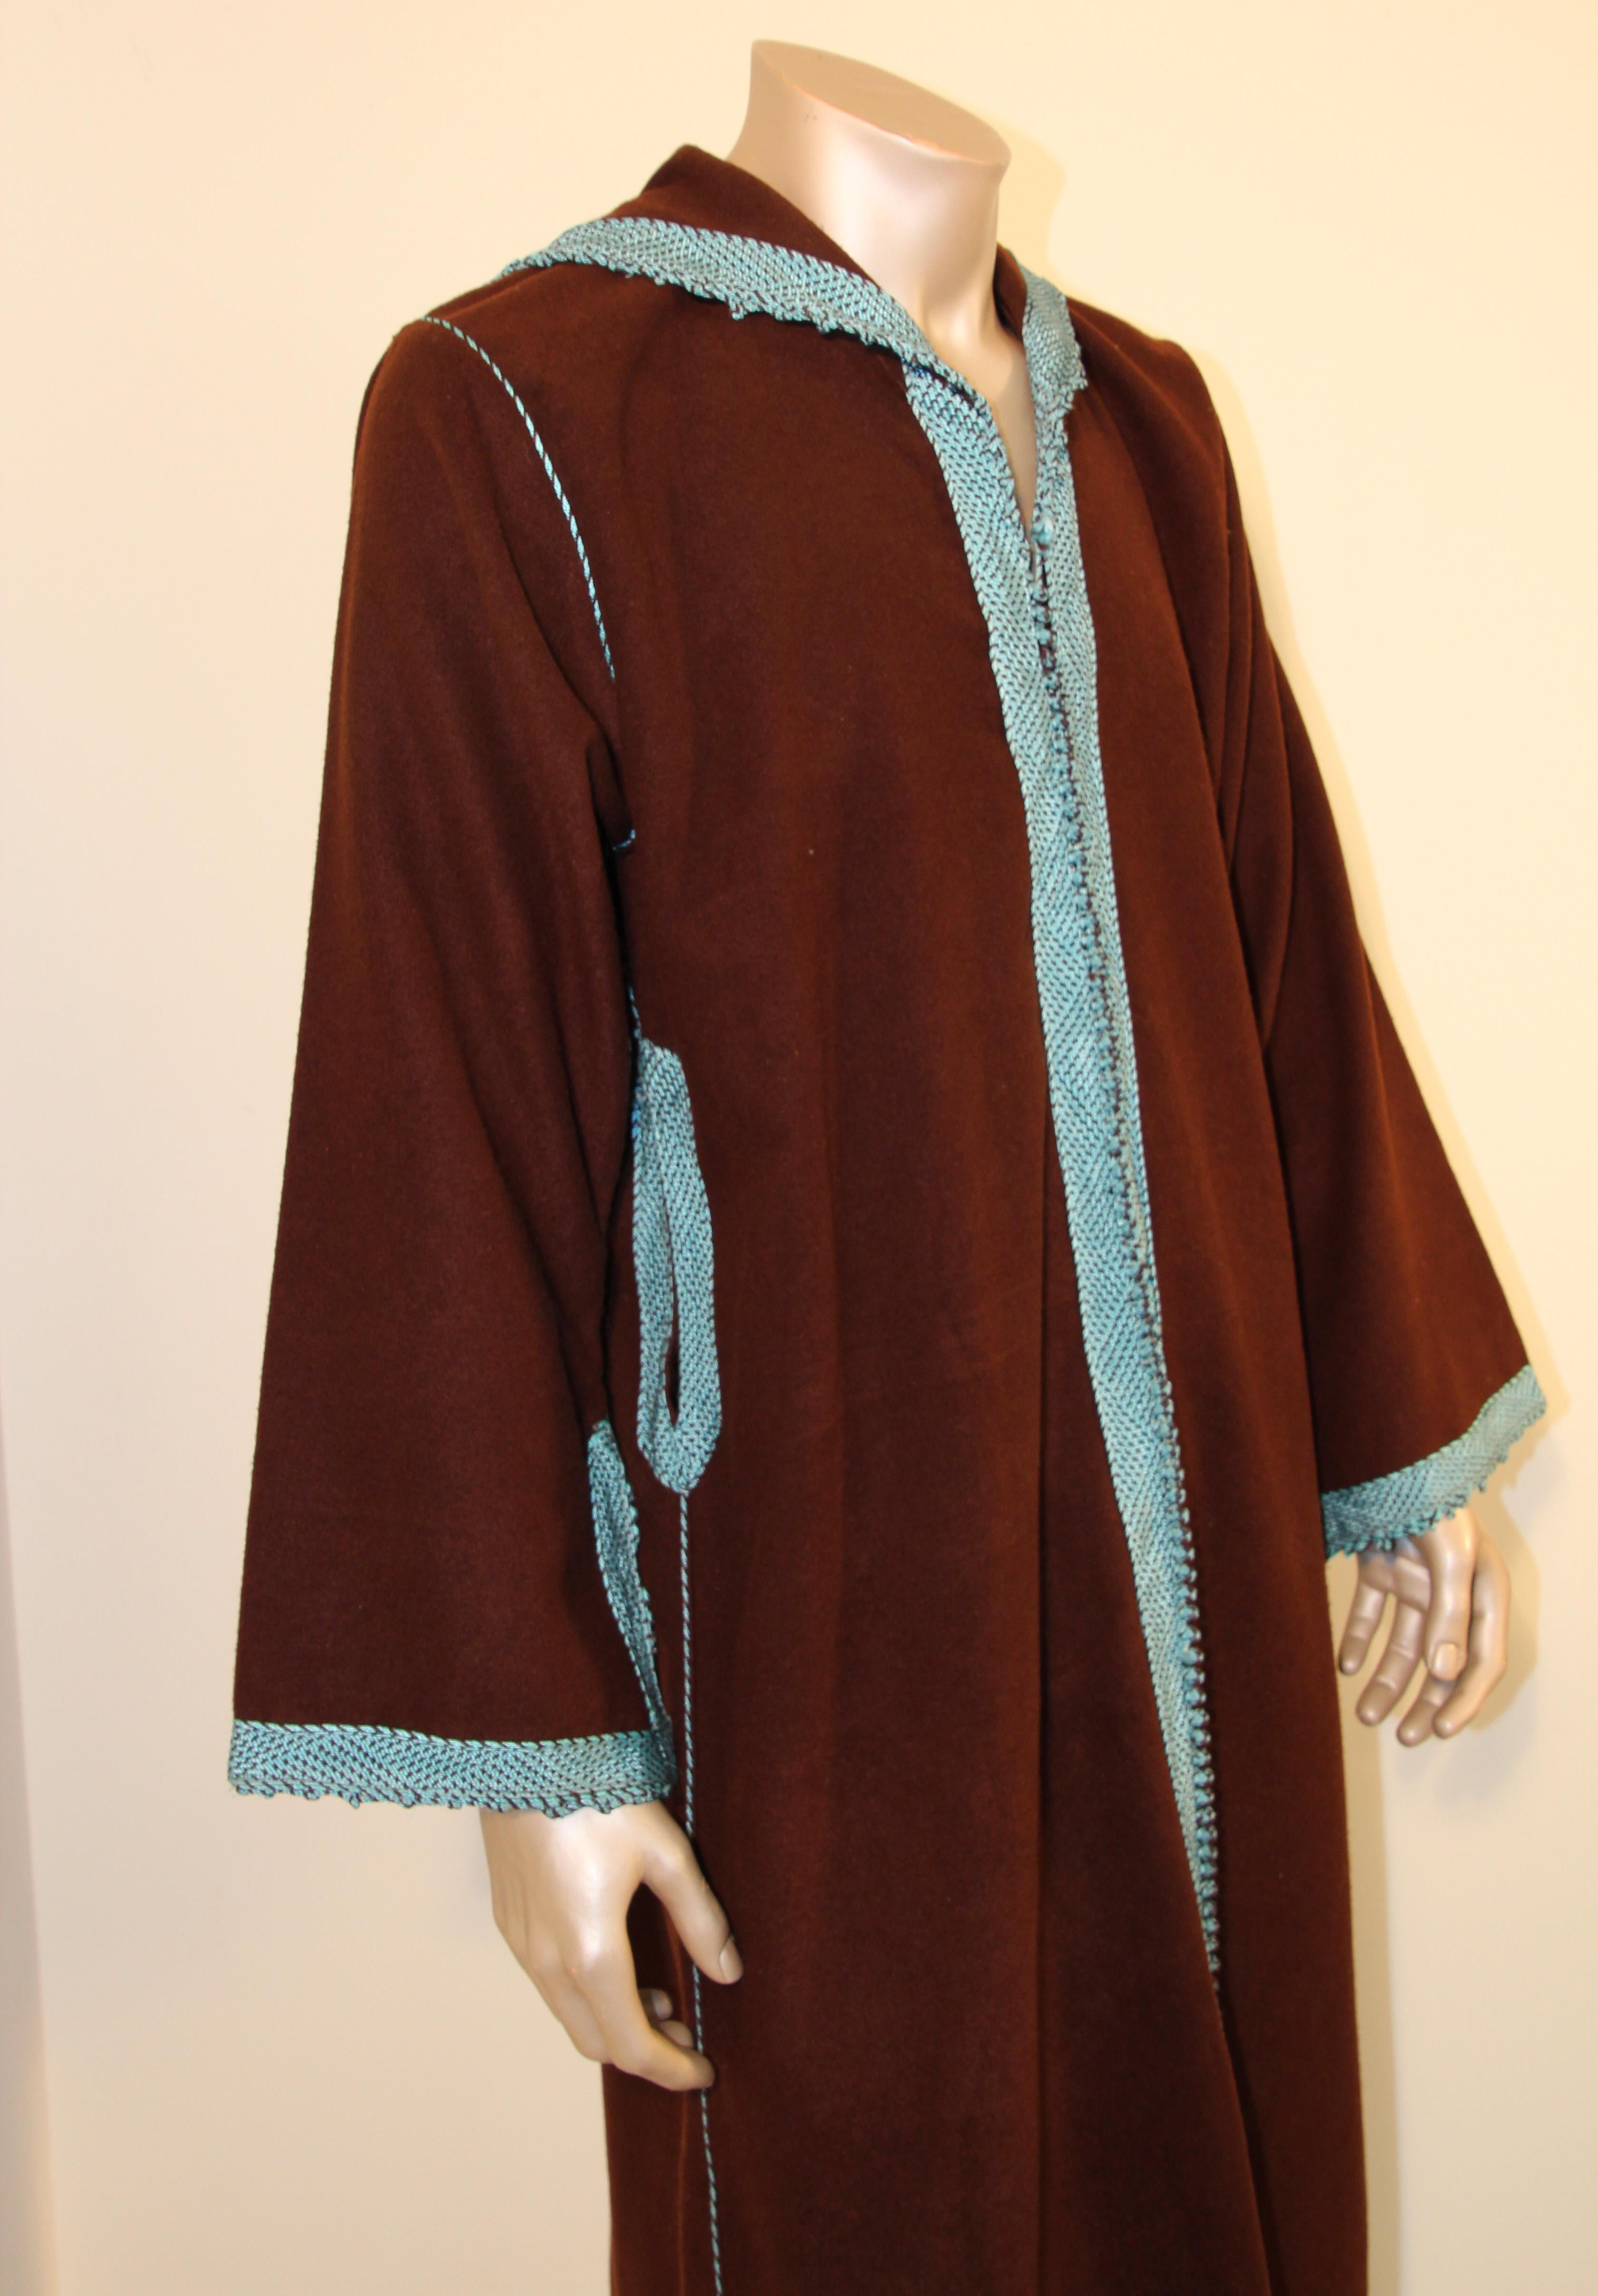 Moorish Cashmere Brown and Turquoise Caftan 1980s Robe For Sale